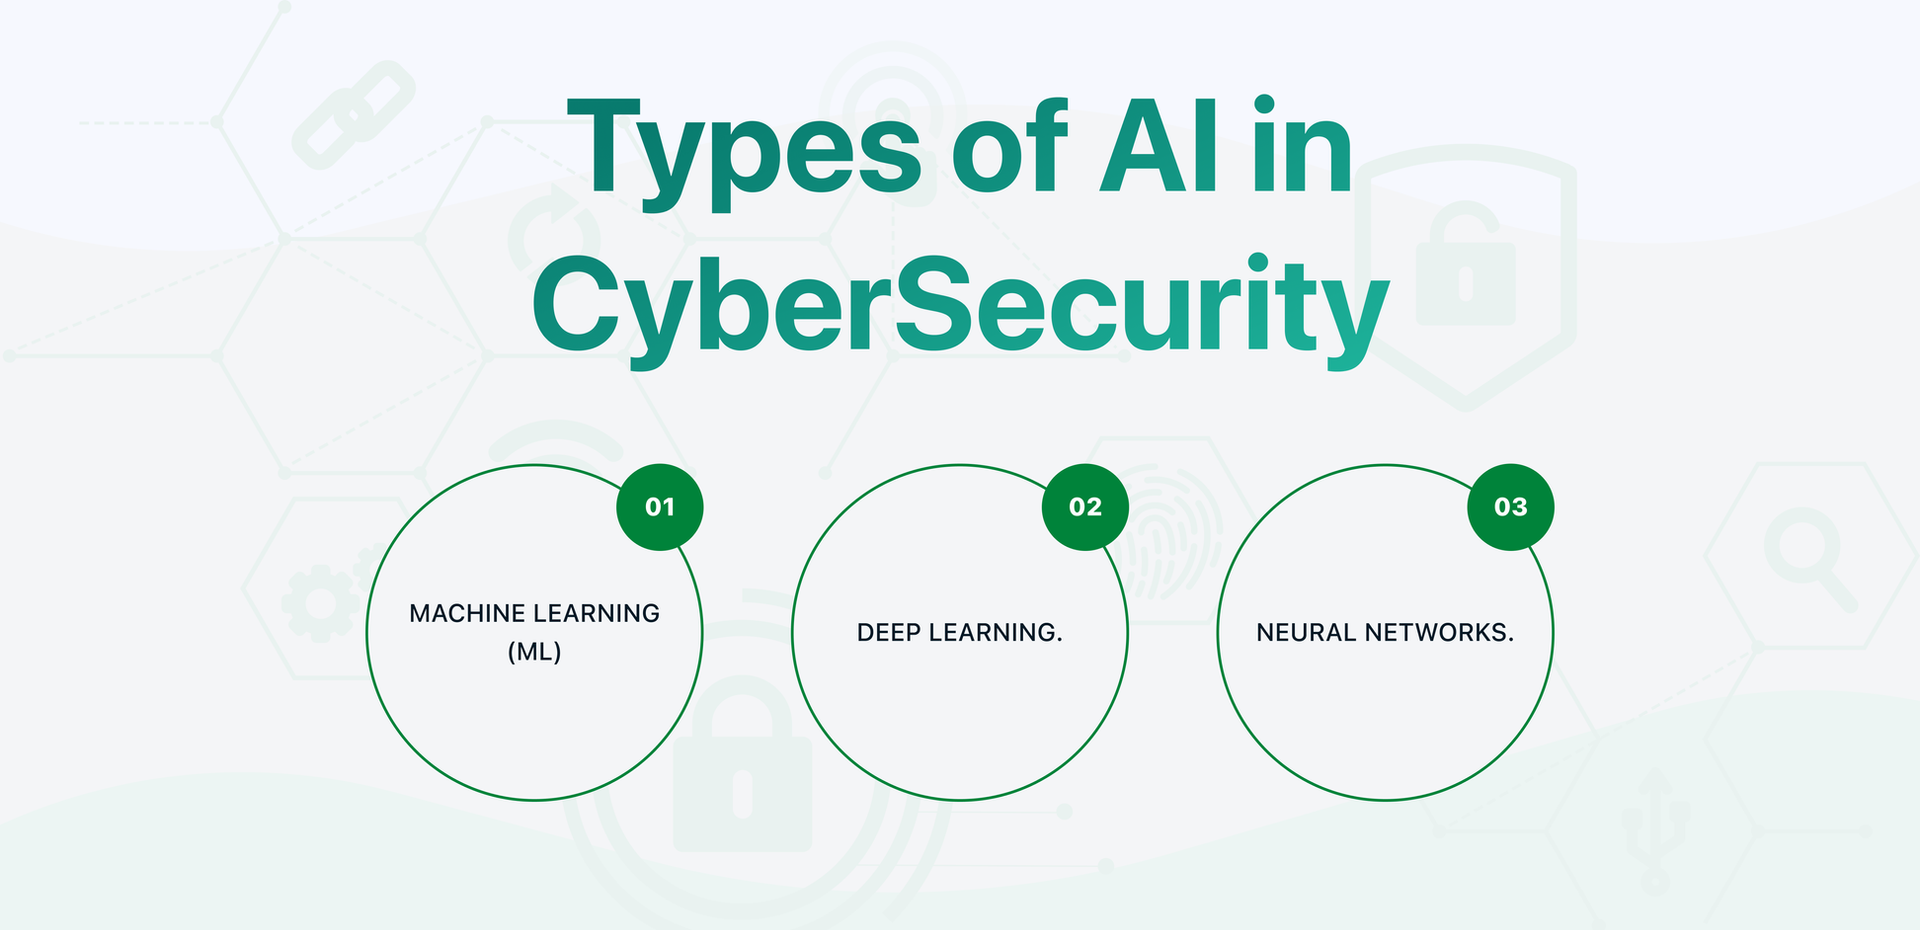 Types of AI in Cybersecurity